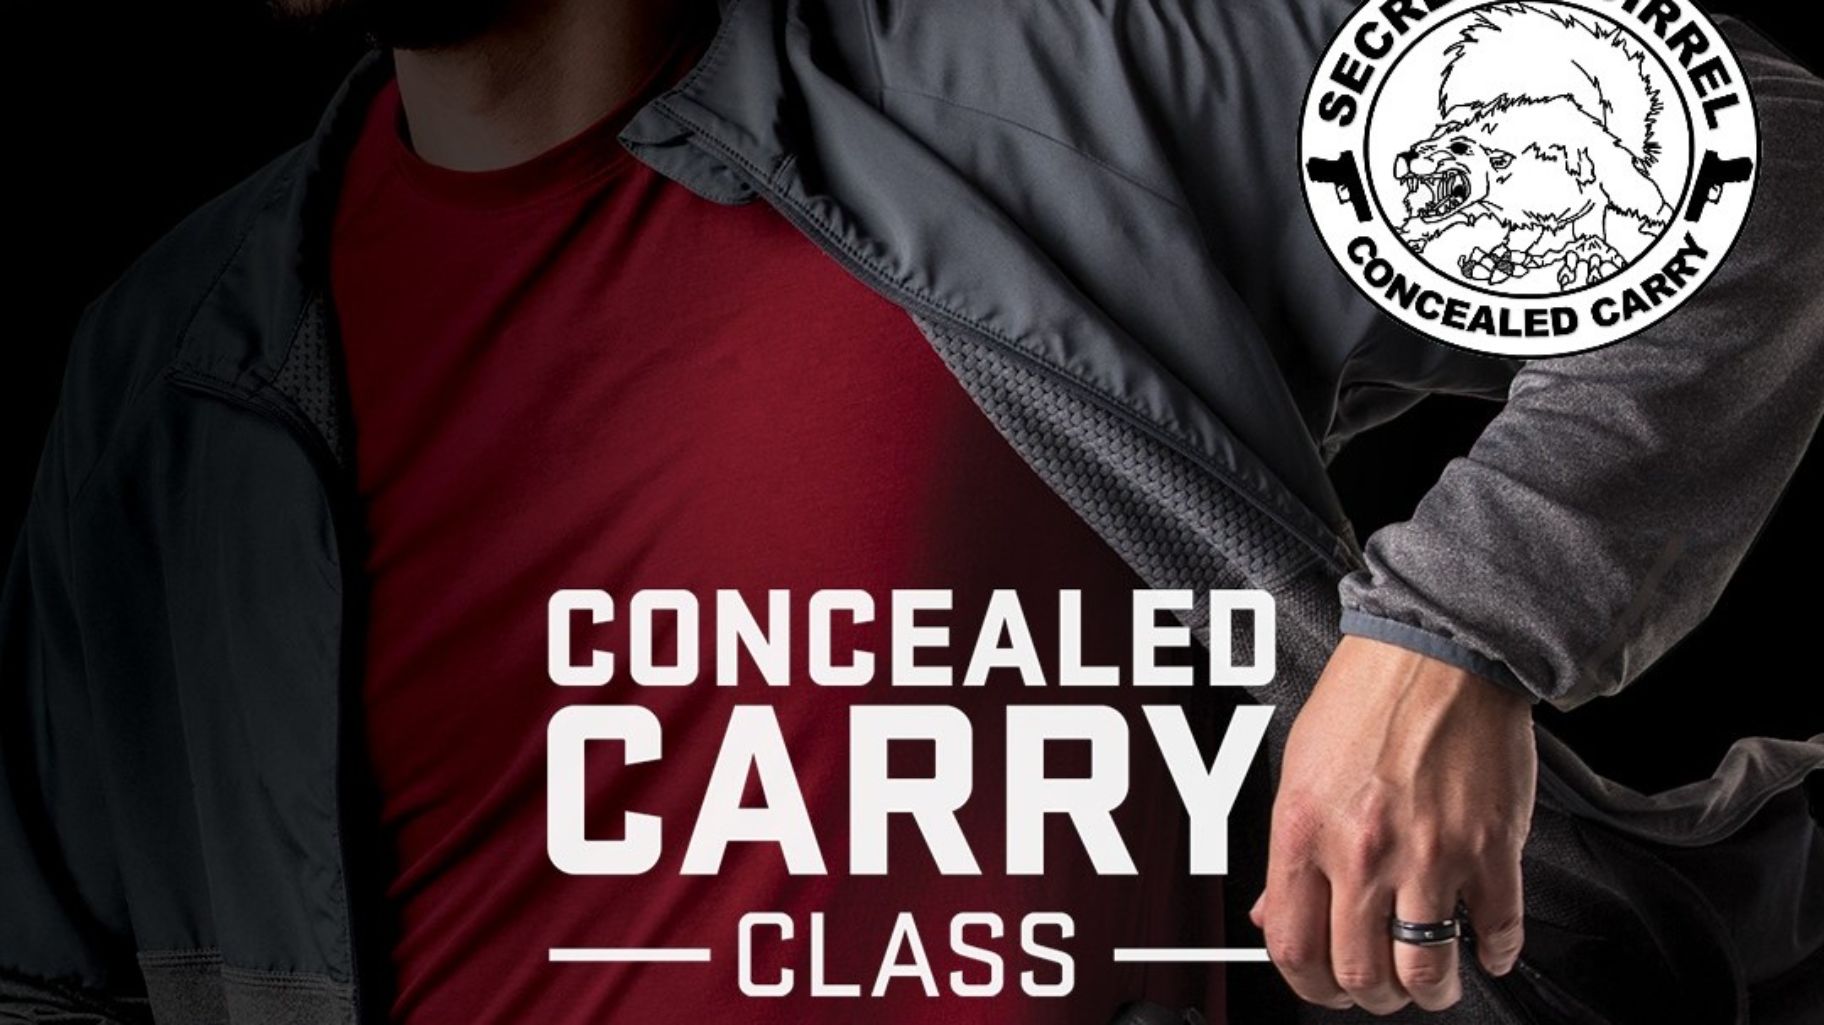 Concealed carry in Summer Clothing - Concealed Carry - USCCA Community